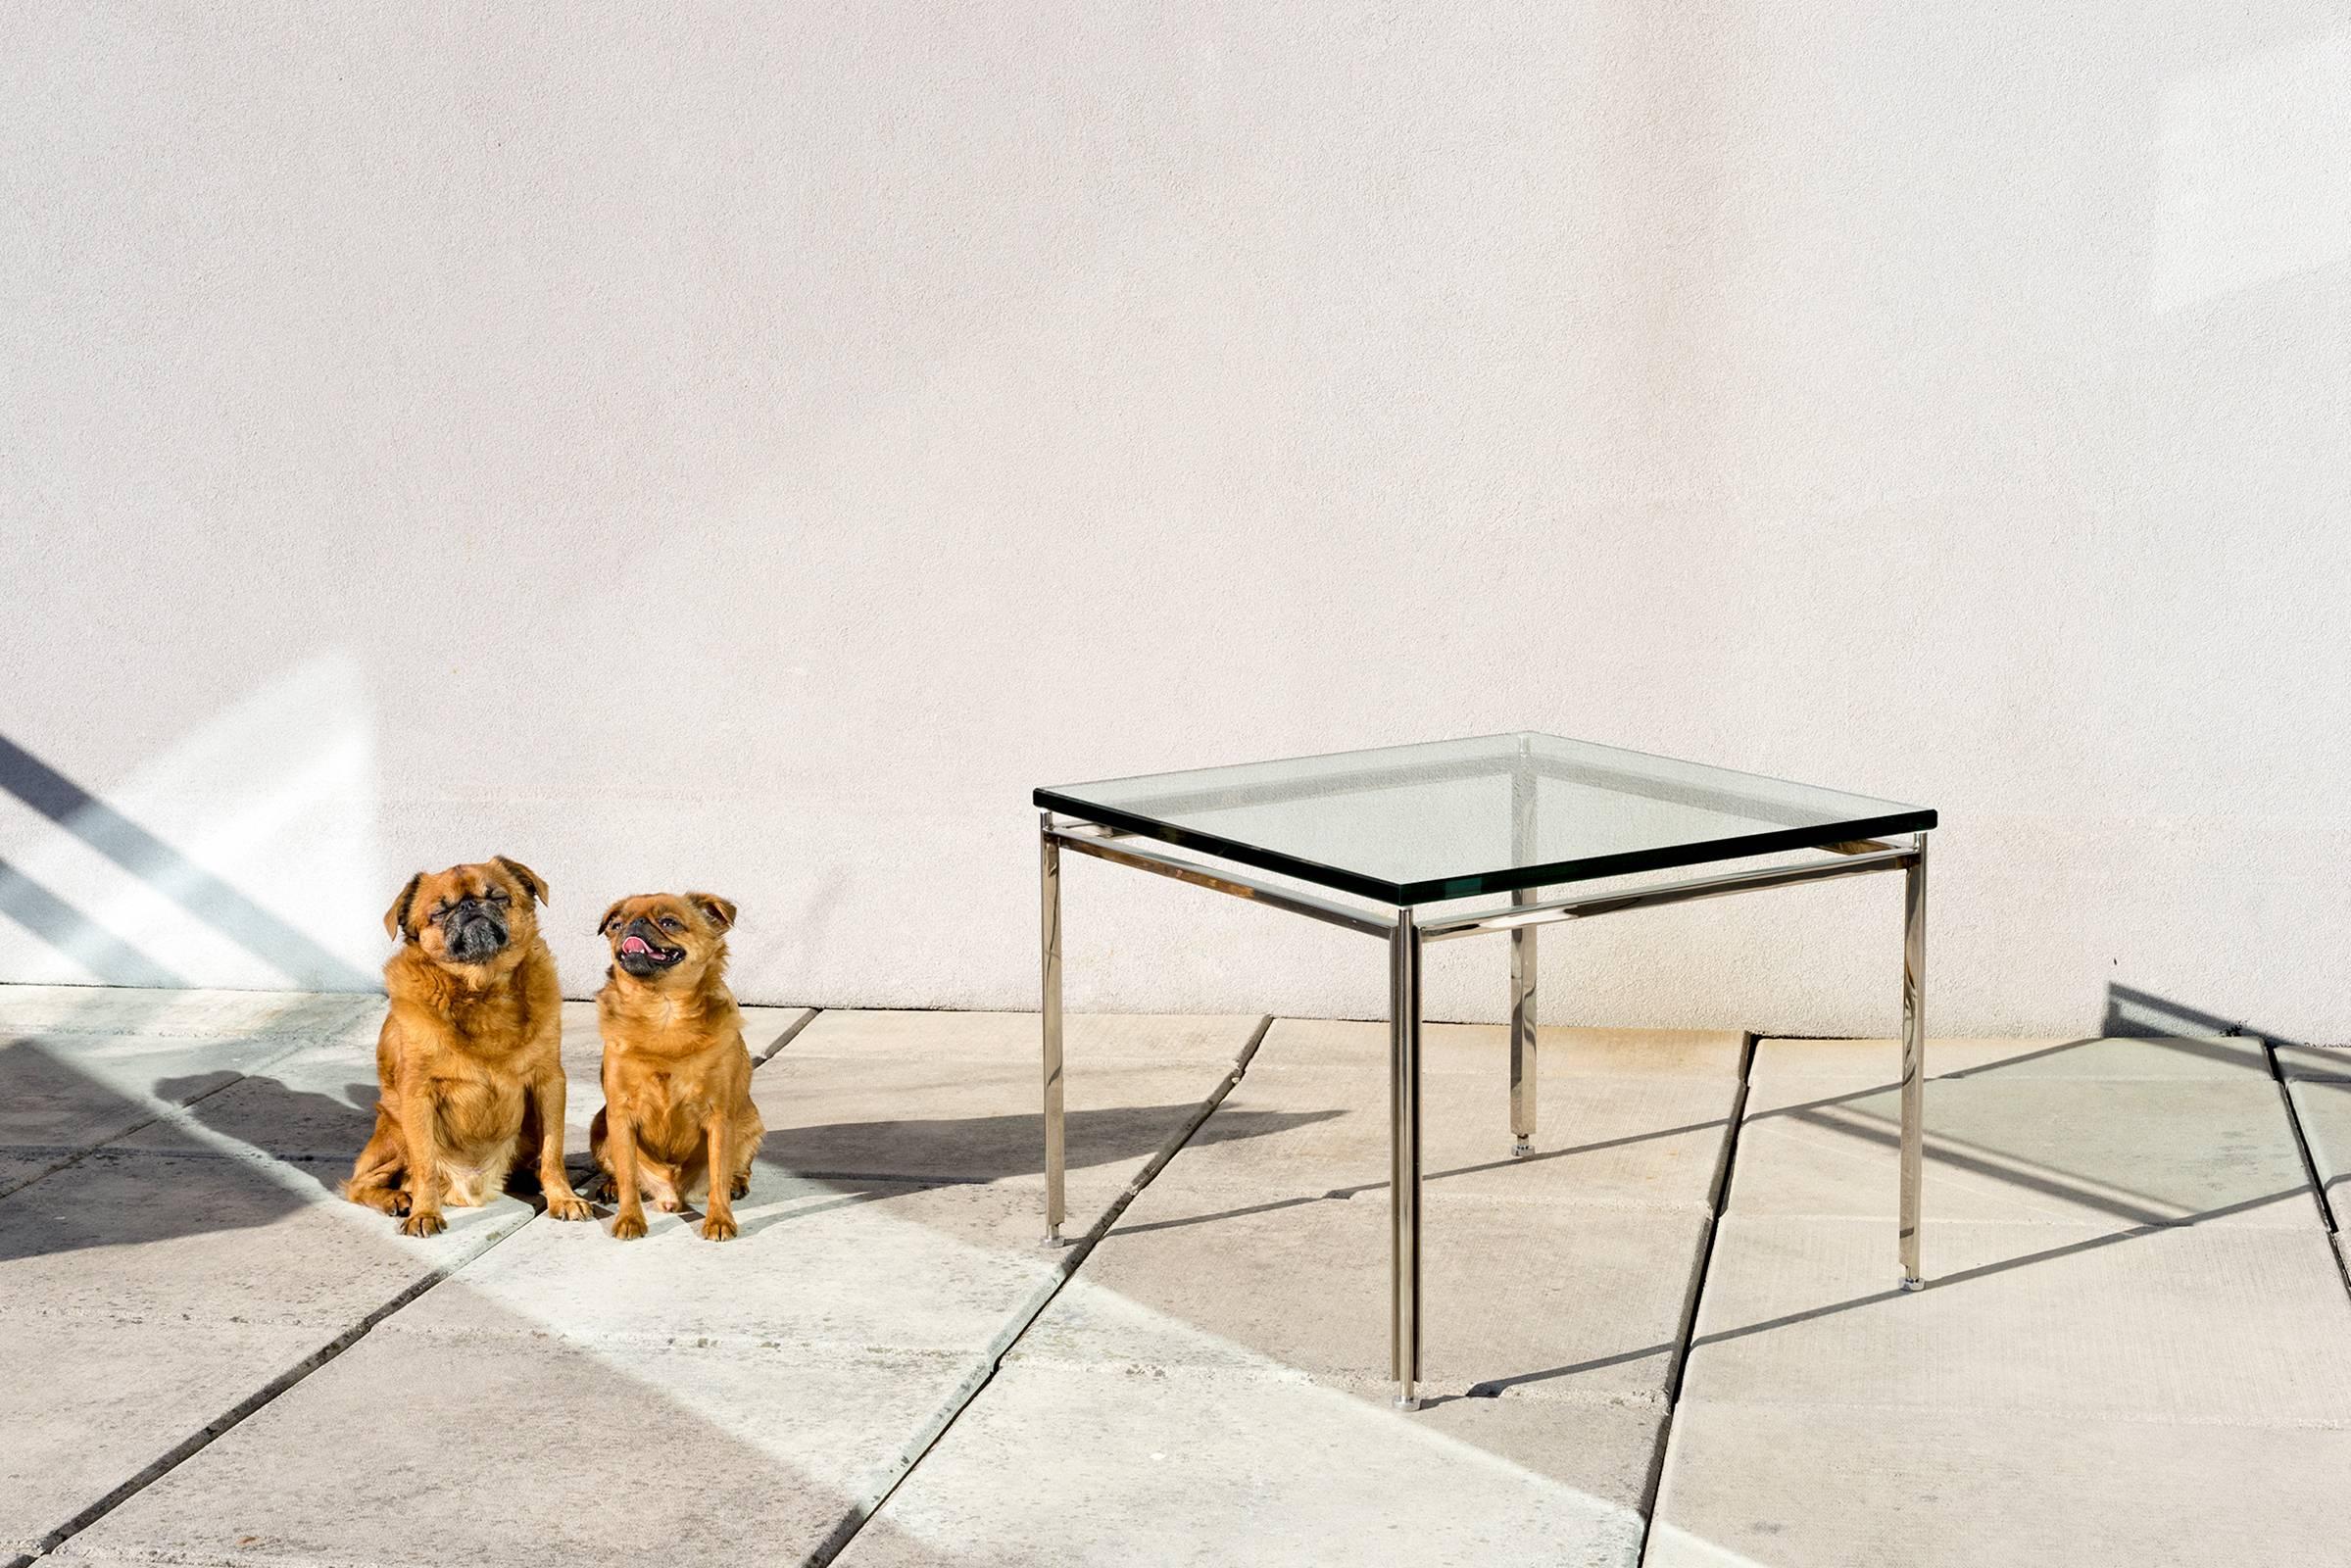 Versatile; functions well as a side or cocktail table. Lightweight yet sturdy steel base with bright, polished metal finish. Original, height-adjustable feet. Three quarter inch glass top floats above frame for a lightweight, airy effect. Clean and